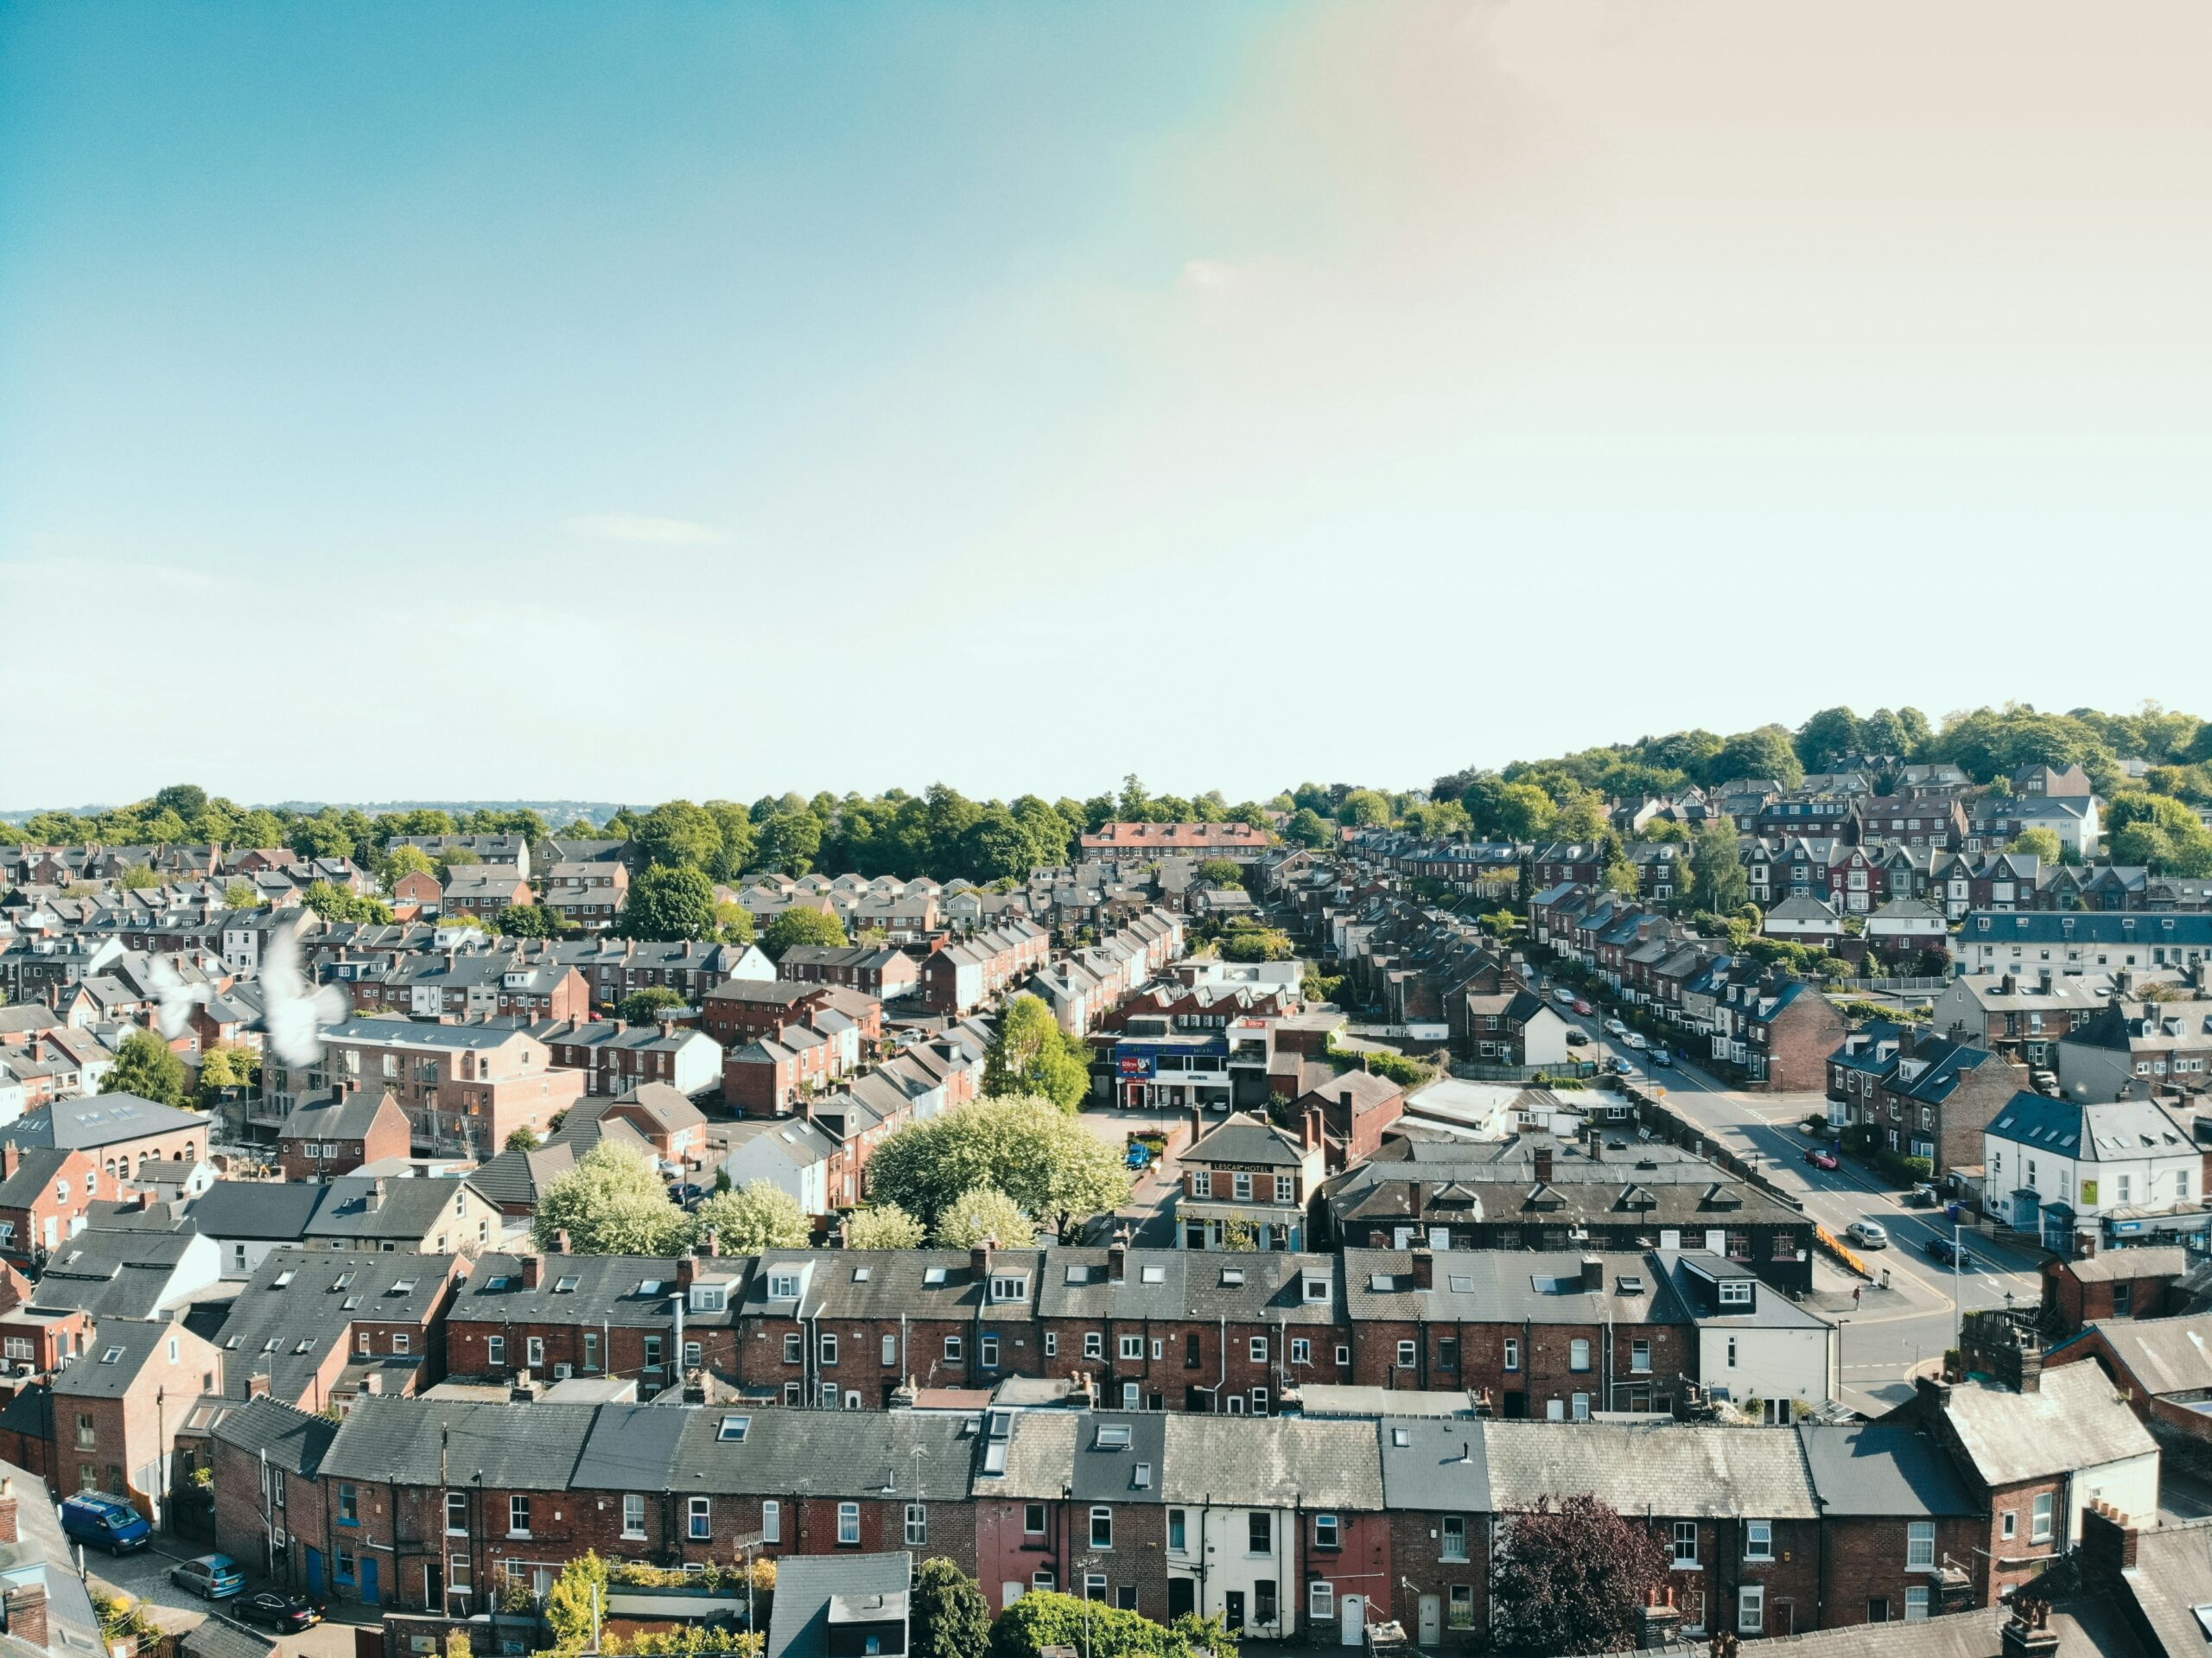 LandlordBuyer Study Reveals Alarming Surge in Landlord Possession Claims and Repossessions